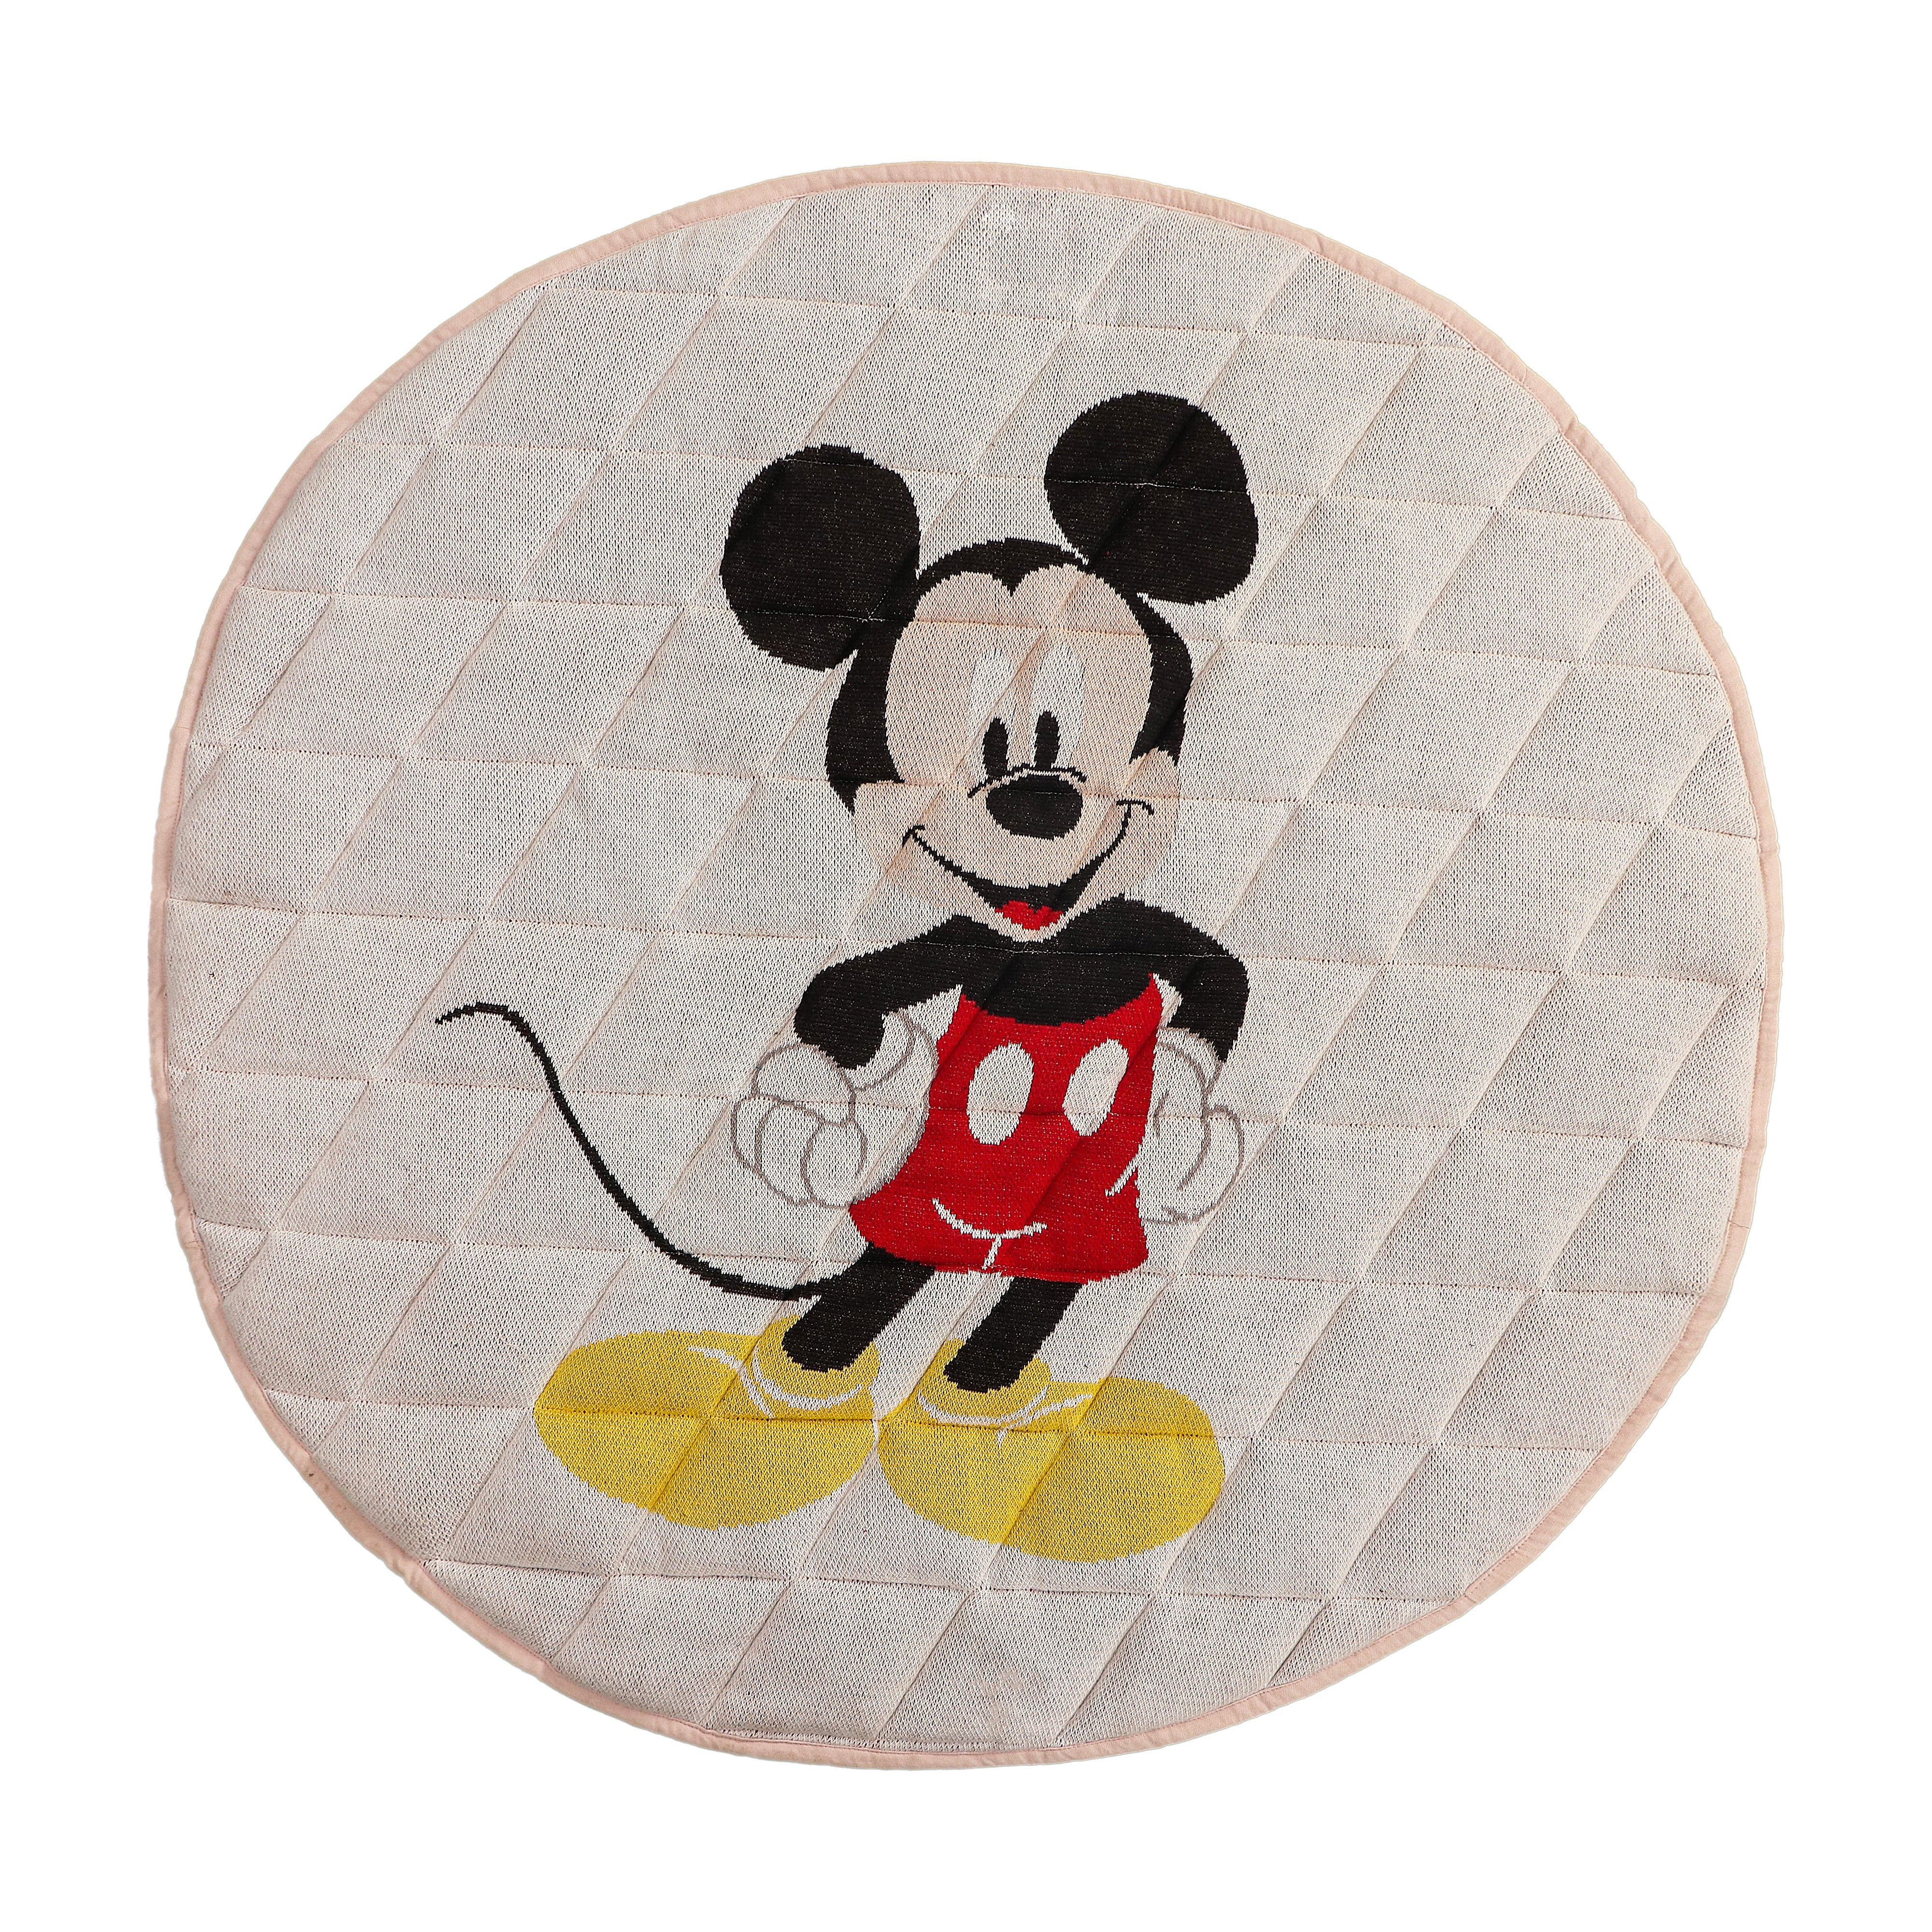 Disney Baby Activity Mat, Play Mat for Baby, Baby Mat for Floor, Playmat for Babies, 100 cm Round Play Mat for Playpen, Soft & Skin-Friendly Cotton Fabric, Foldable (Mickey Mouse)